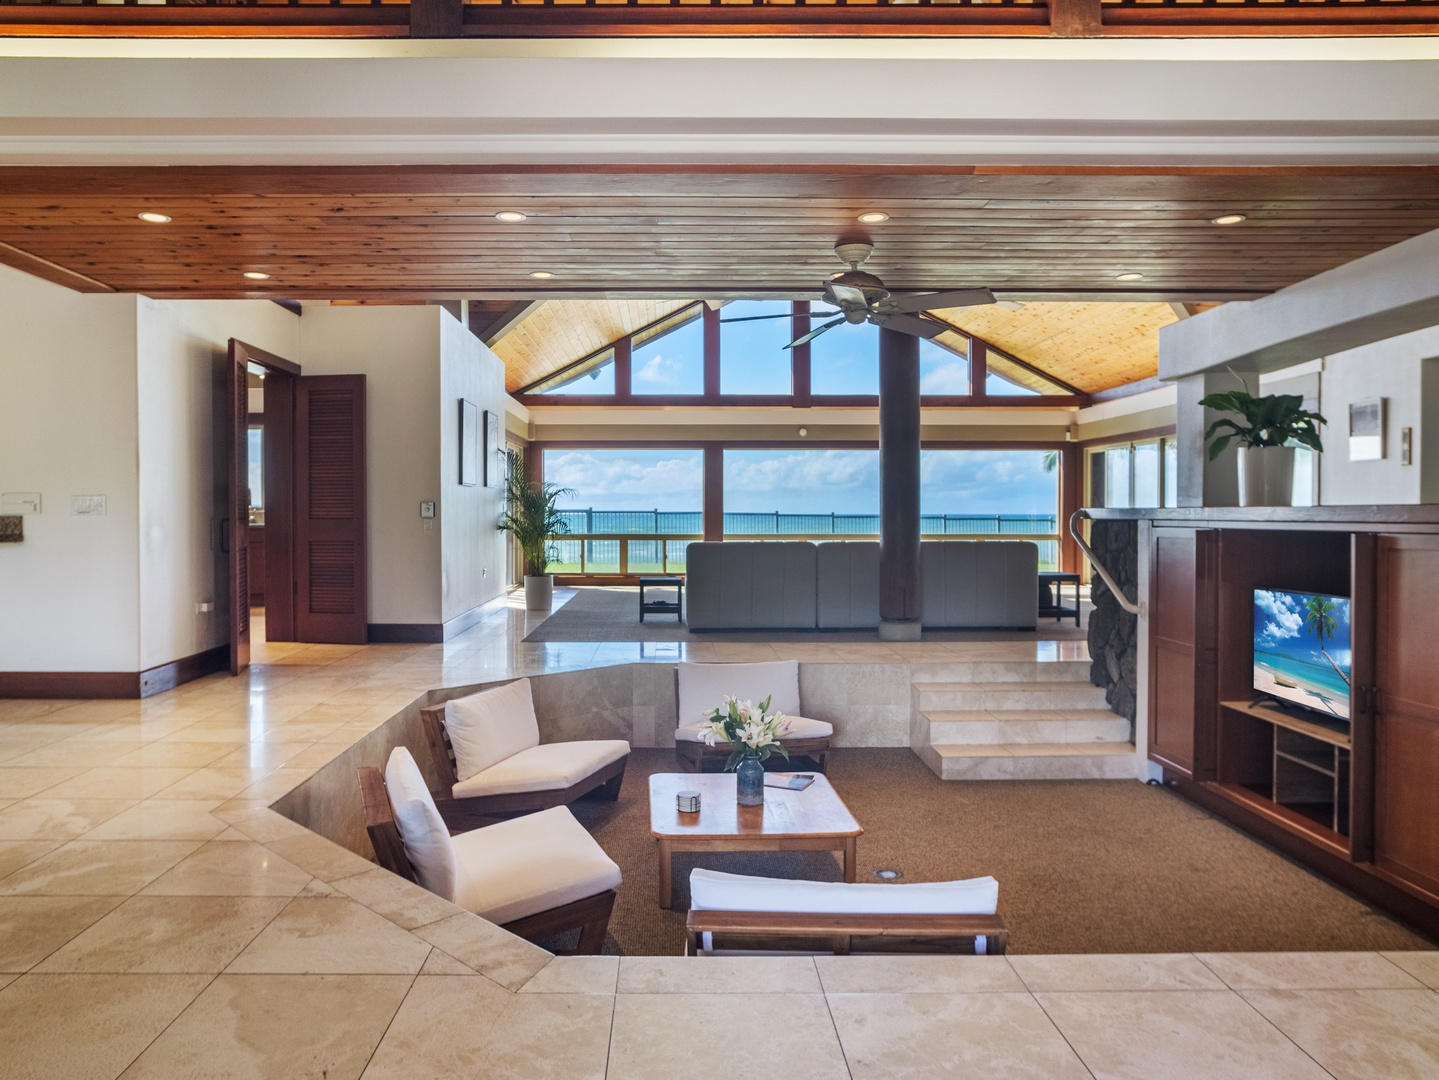 Waianae Vacation Rentals, Konishiki Beachhouse - Dual living spaces with ocean view, perfect for relaxation and socializing.